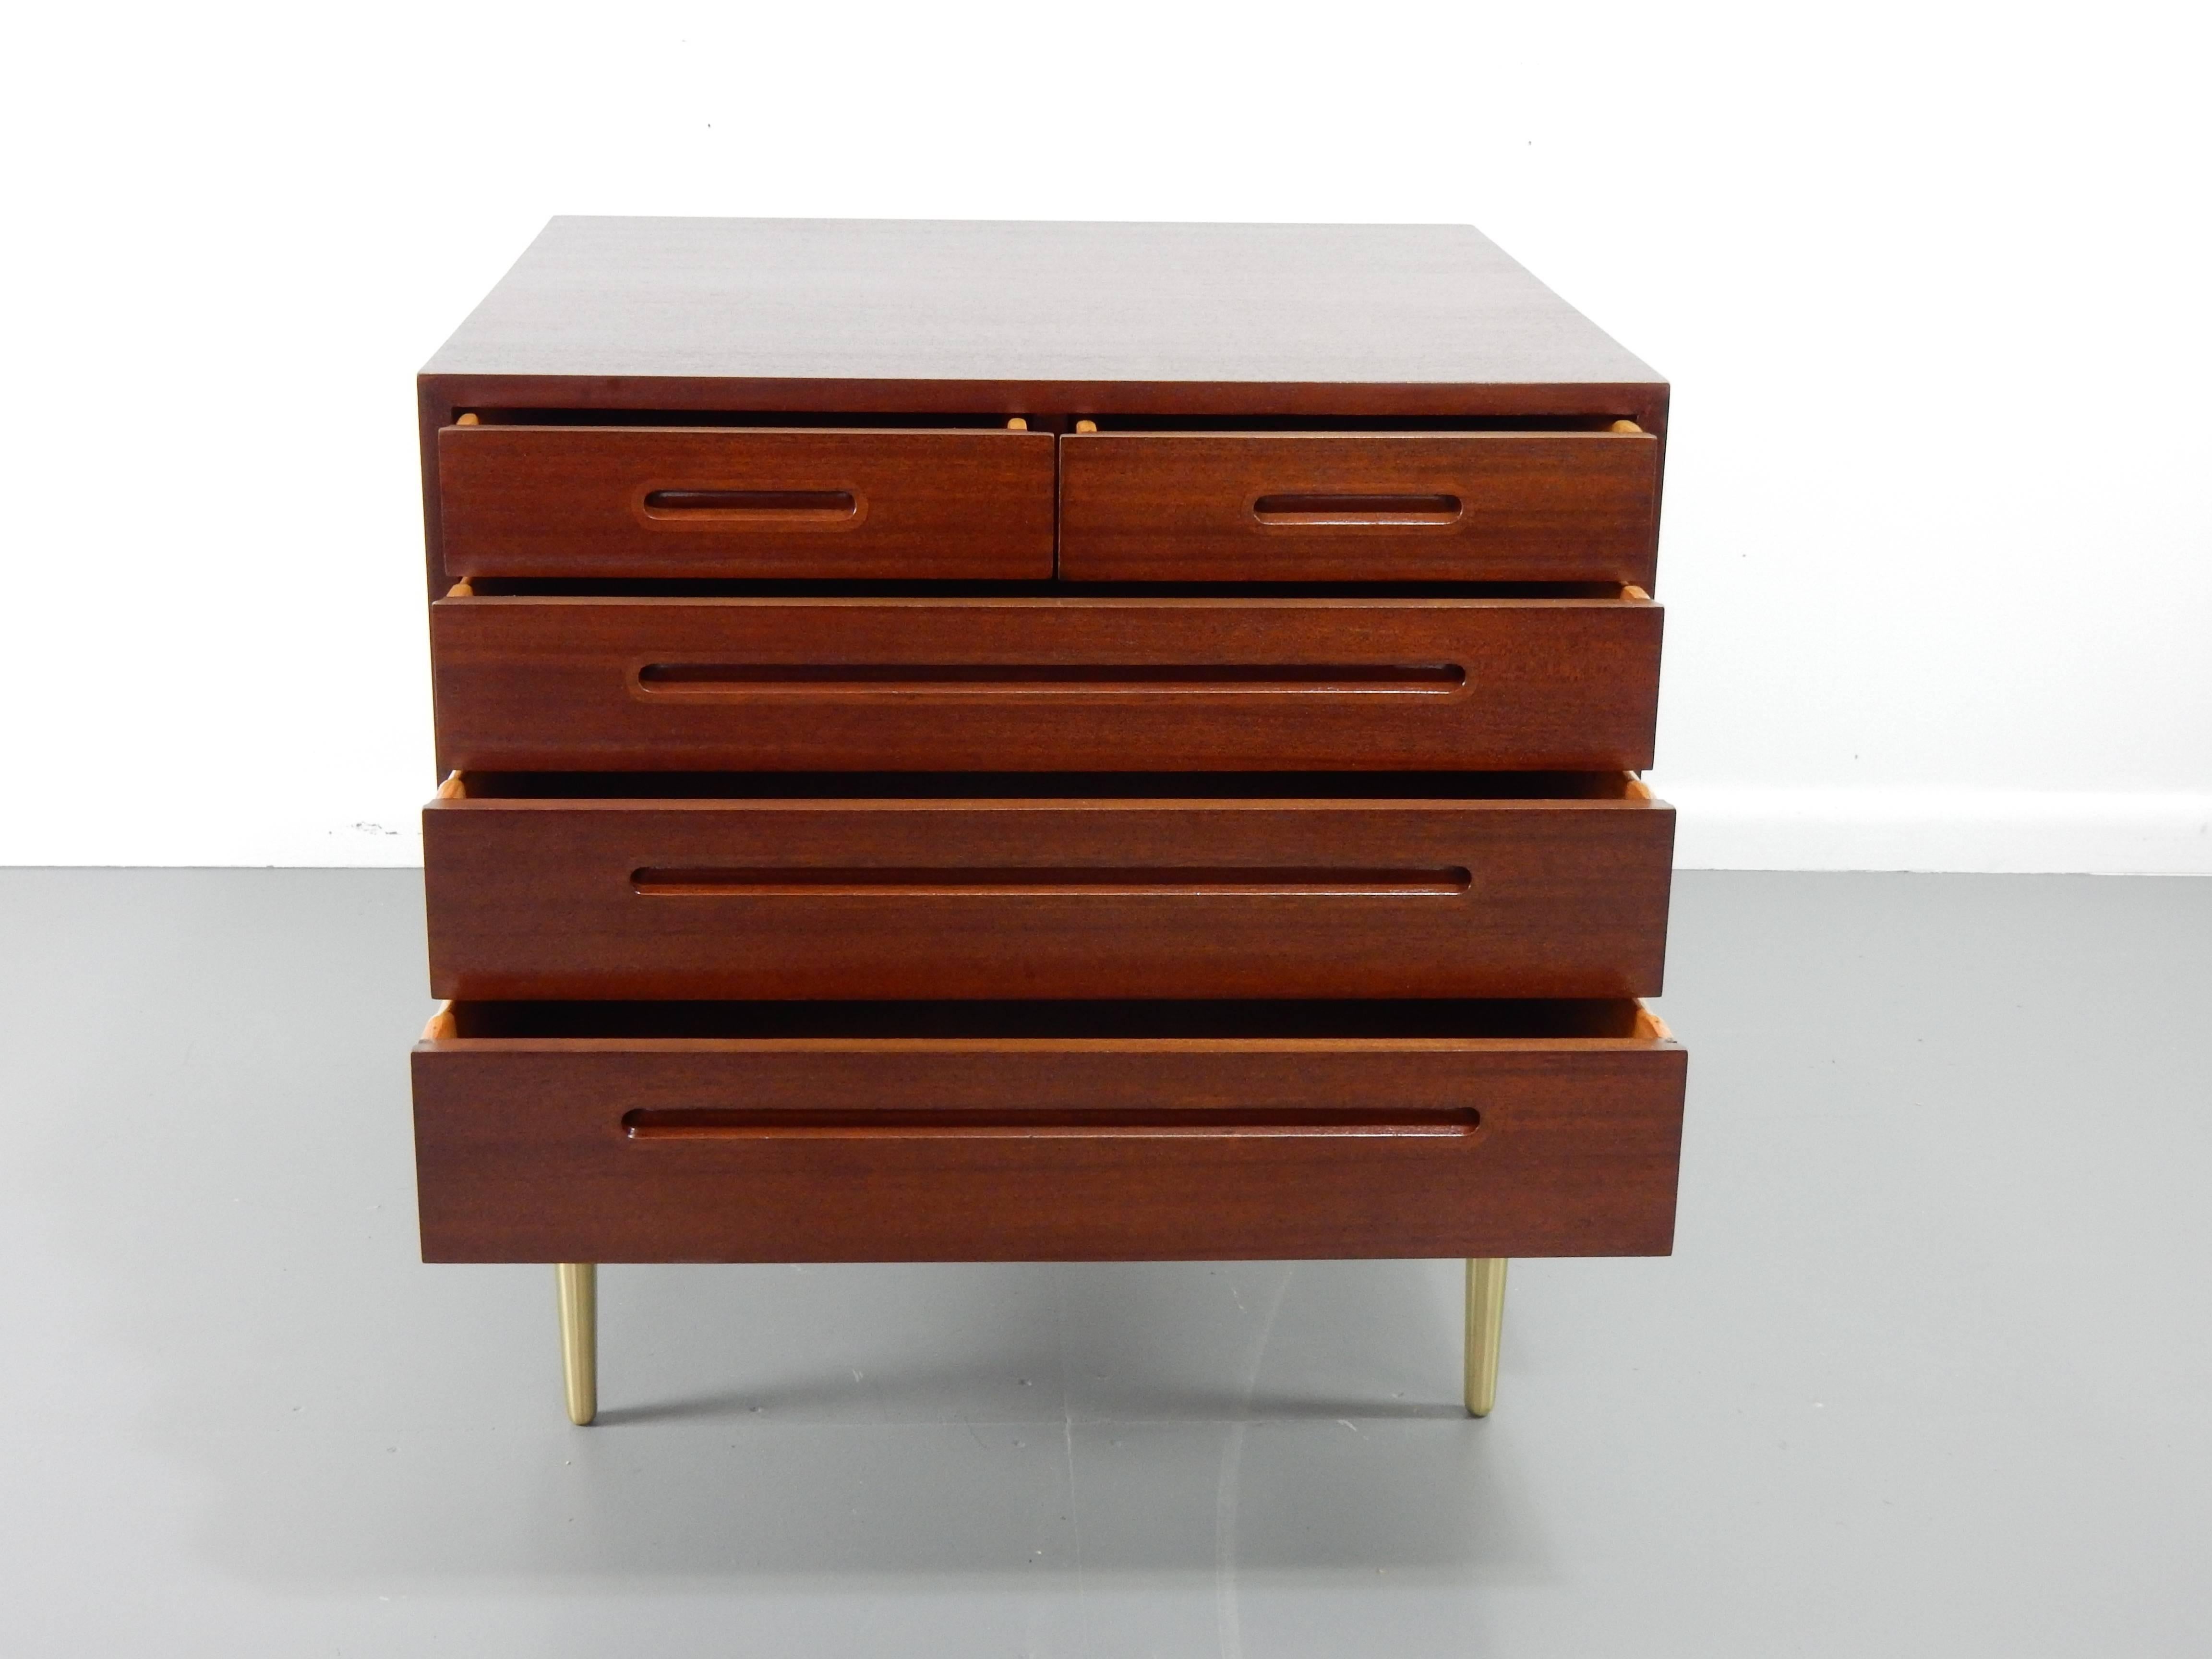 Please find a commode finished in stained mahogany and raised on tapered brass legs by Edward Wormley for Dunbar. American, circa 1950.

Edward Wormley worked in that extraordinary period with Harvey Probber, Vladimir Kagan, George Nelson, Harry